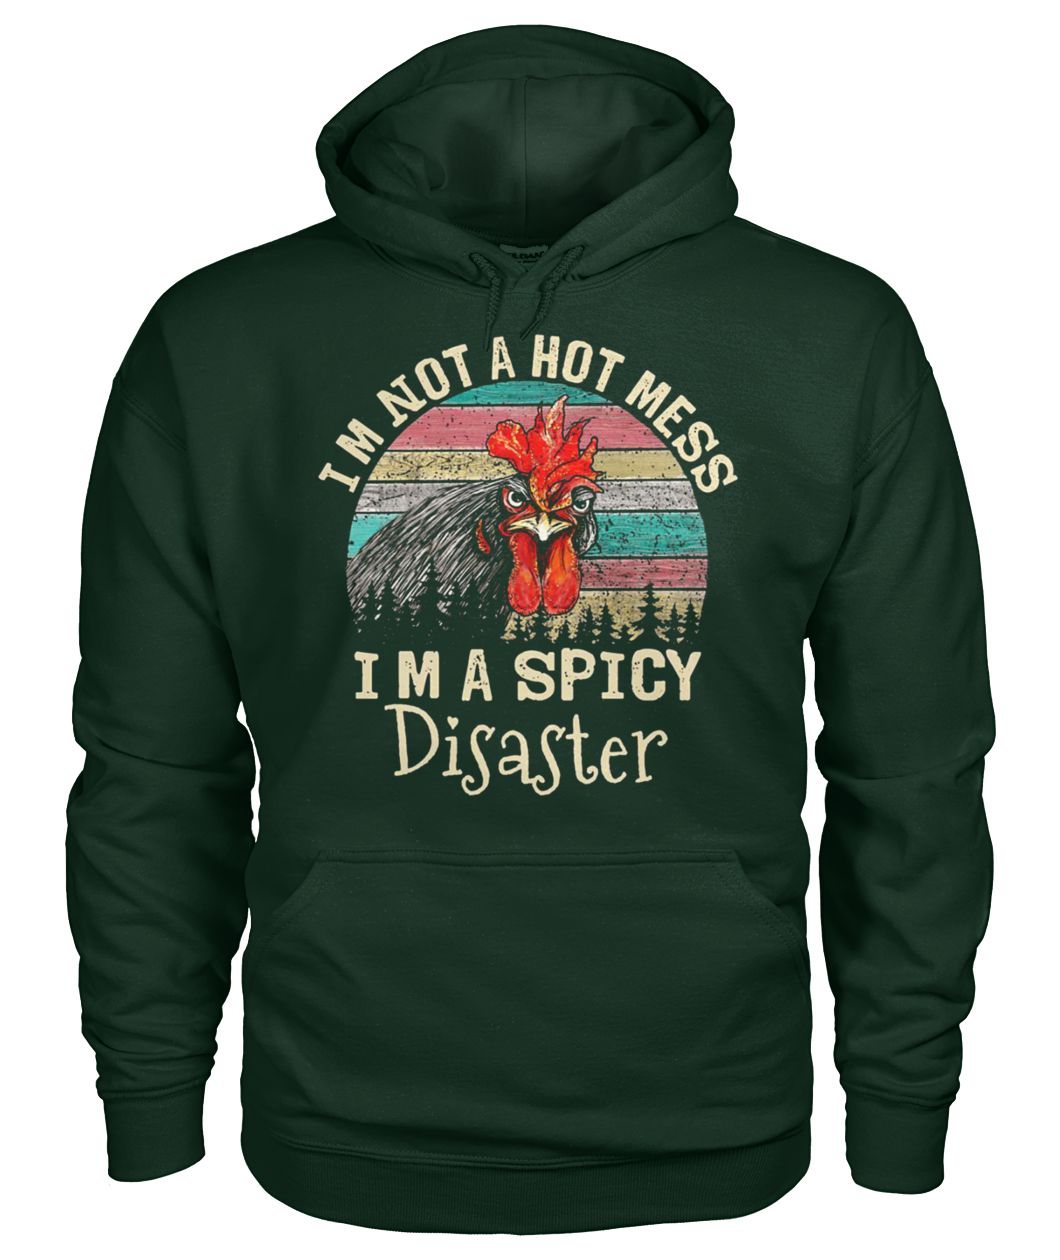 Chicken I'm not a hot mess I'm a spicy disaster vintage gildan hoodie